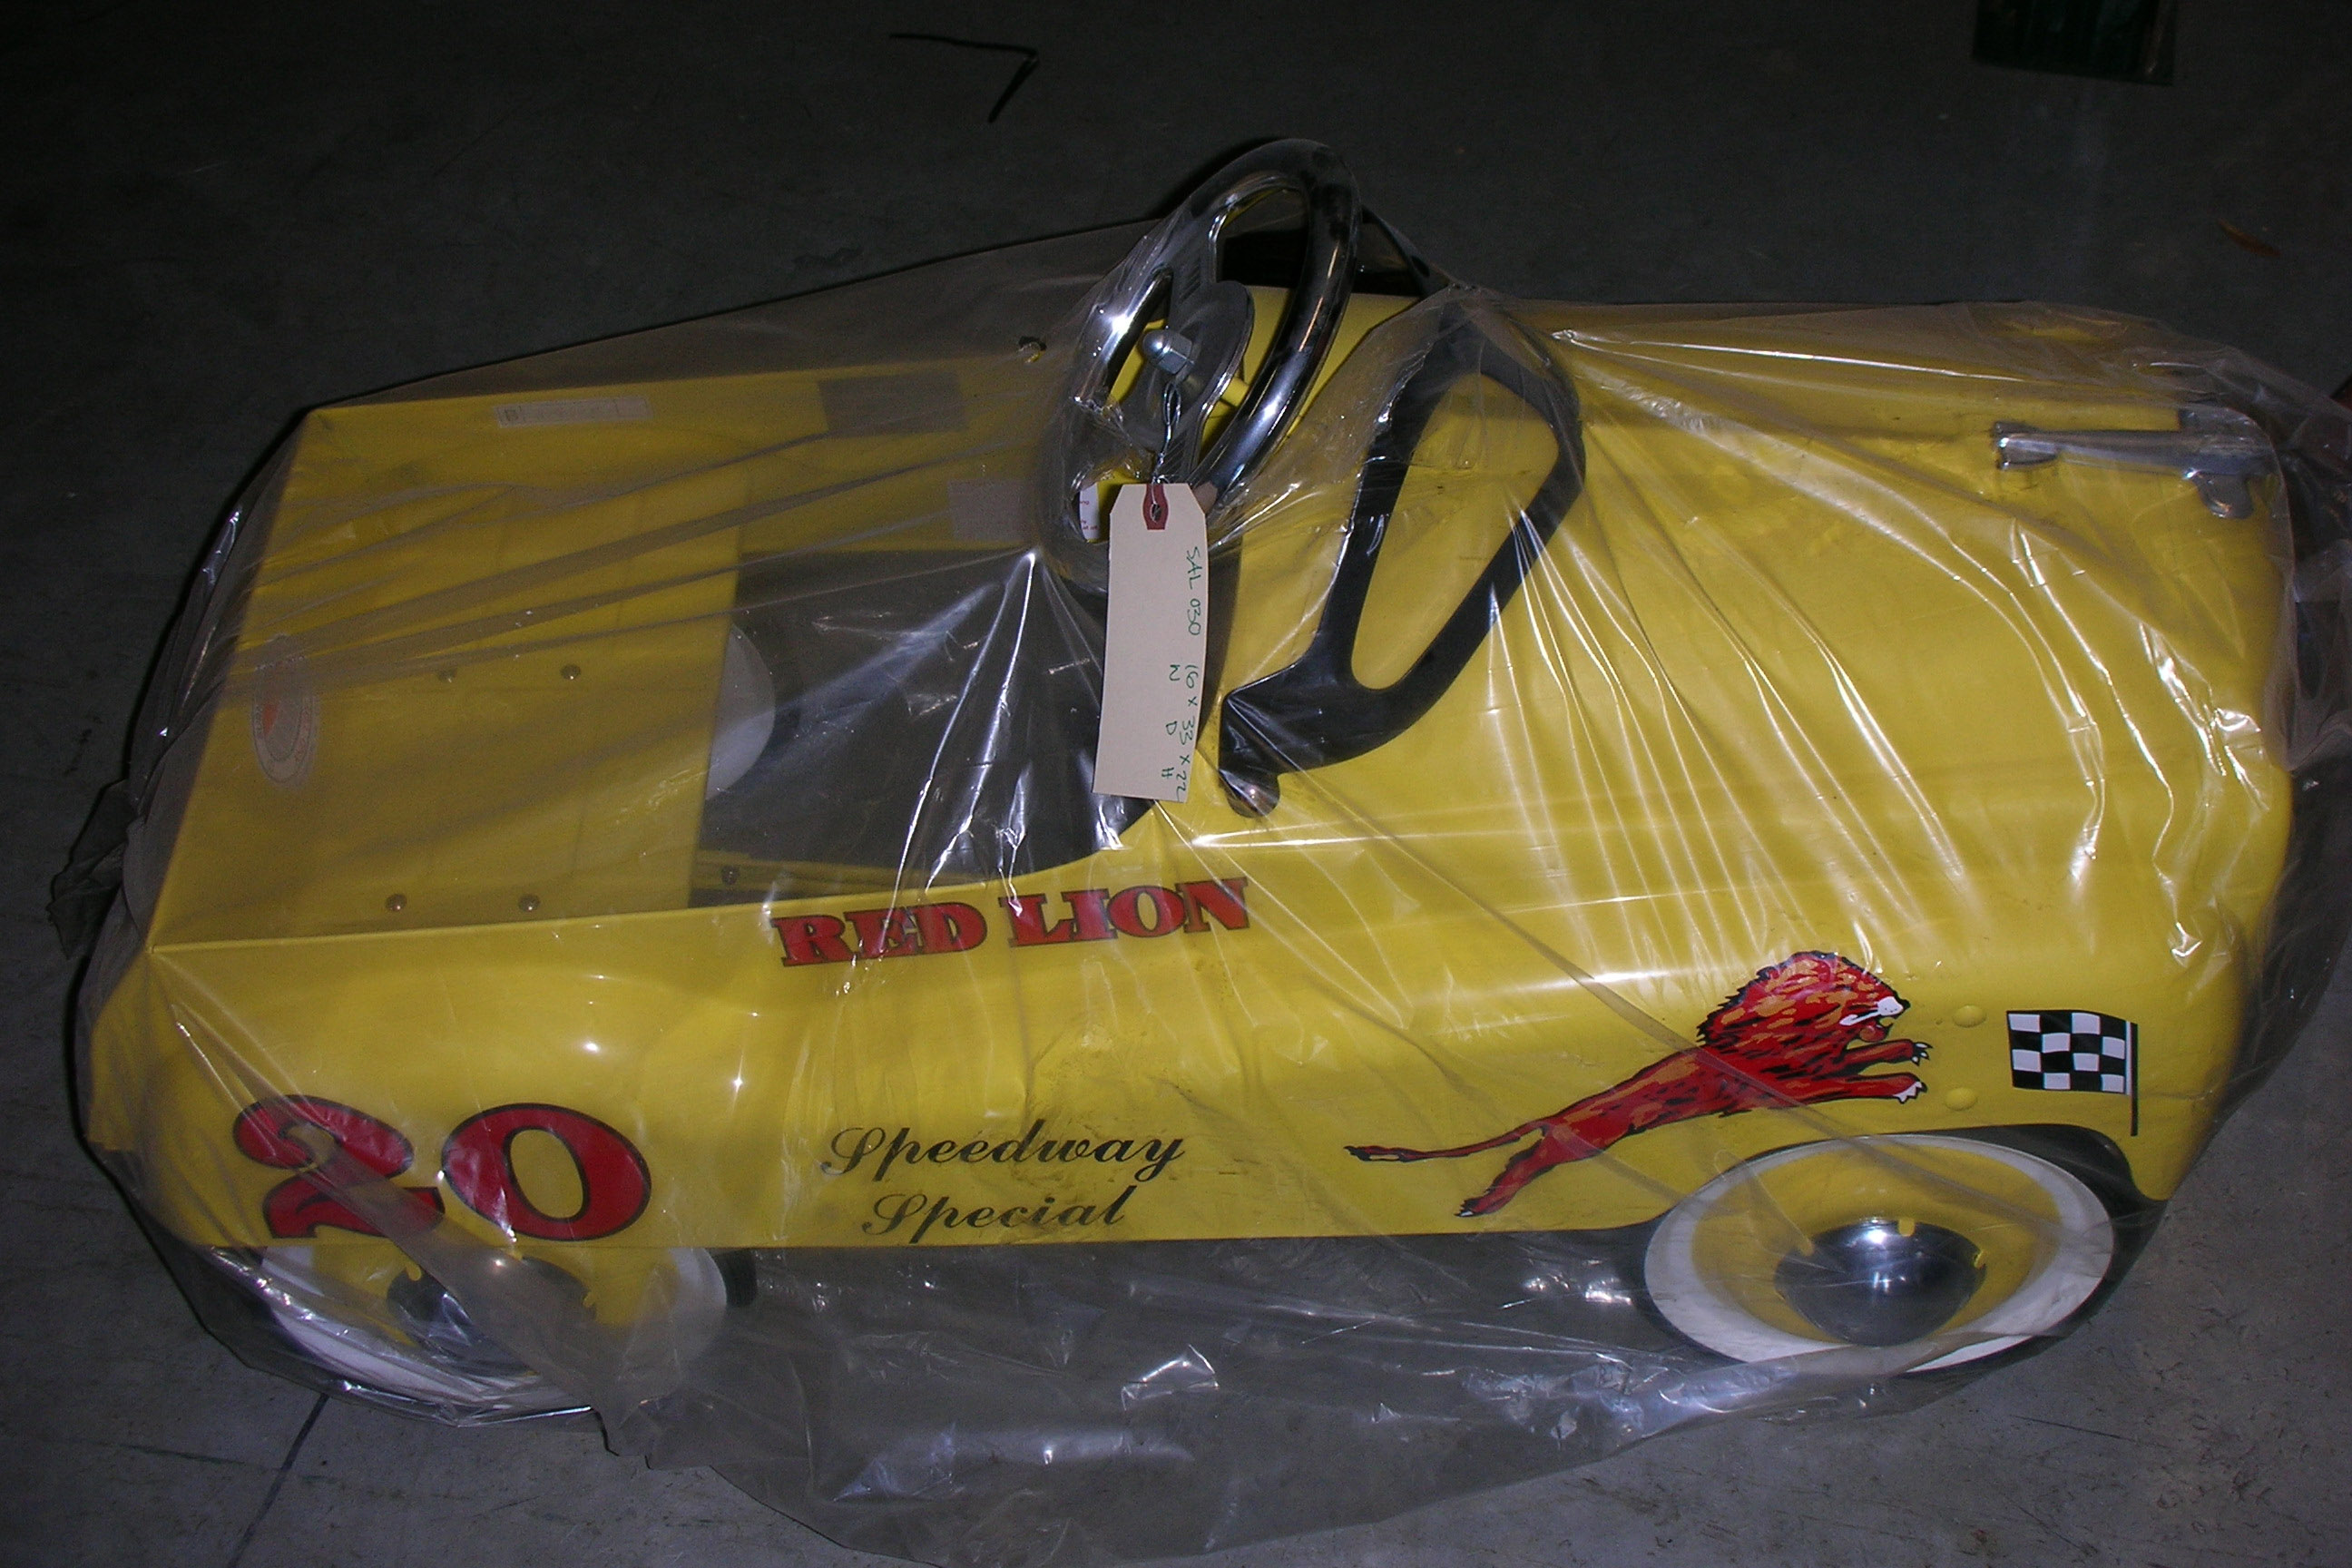 0th Image of a N/A RED LION SPEEDWAY SPECIAL PEDAL CAR